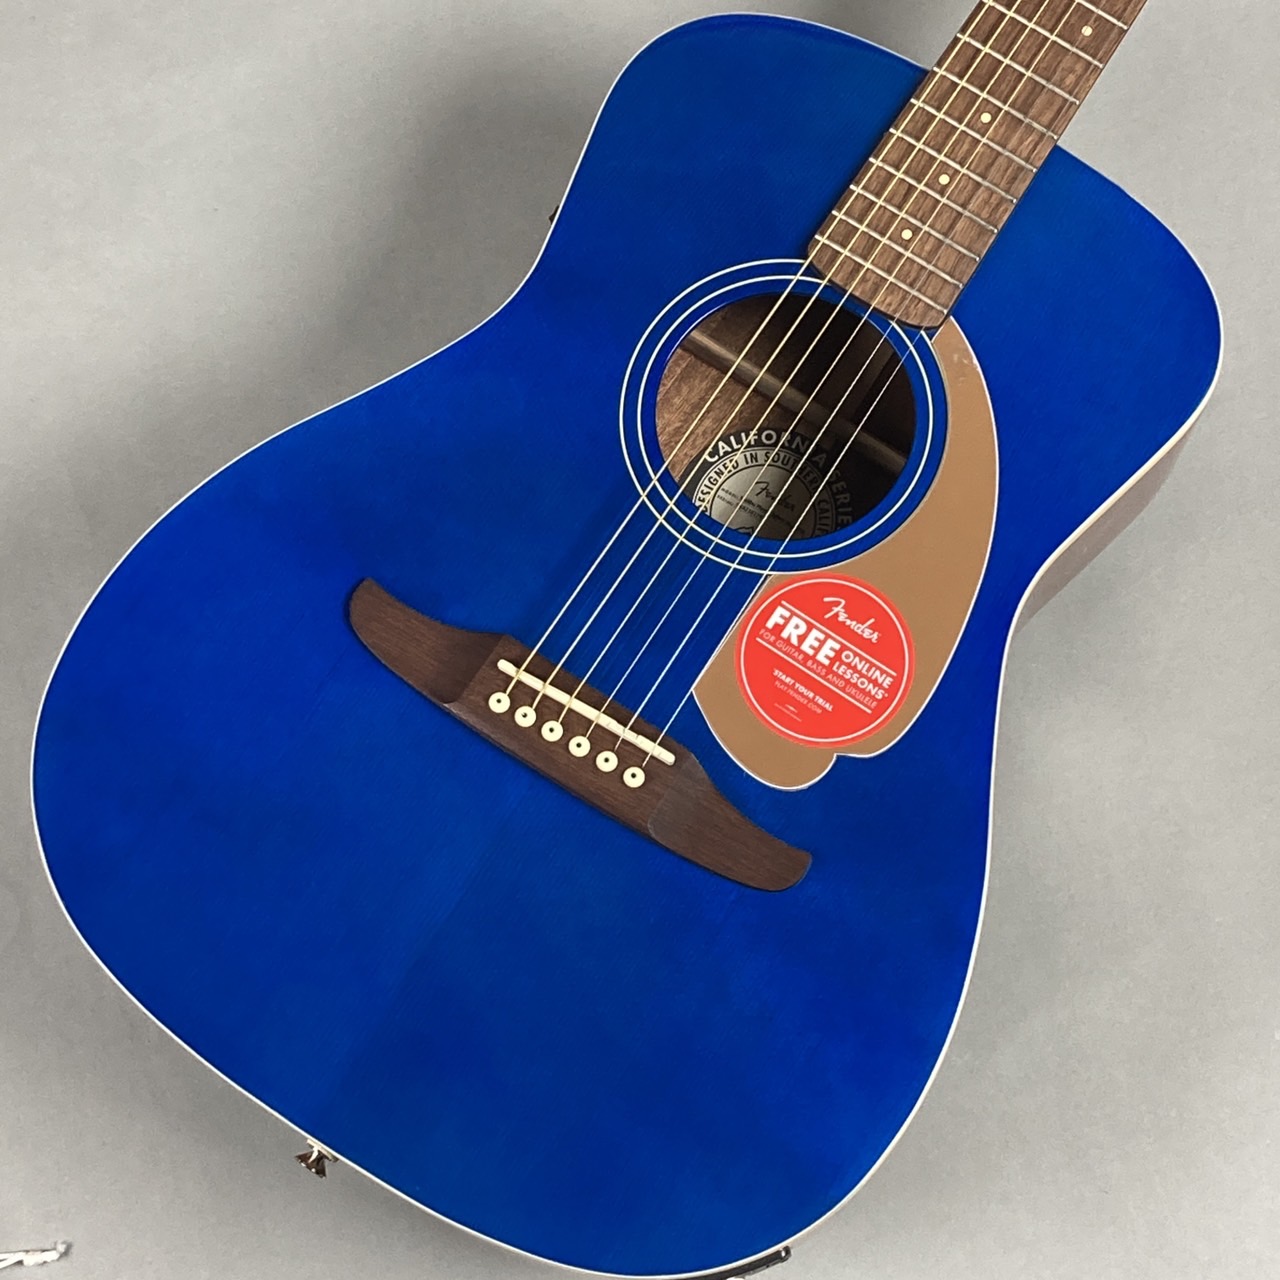 Fender USA JZM Coustic Deluxe エレアコ - 楽器/器材